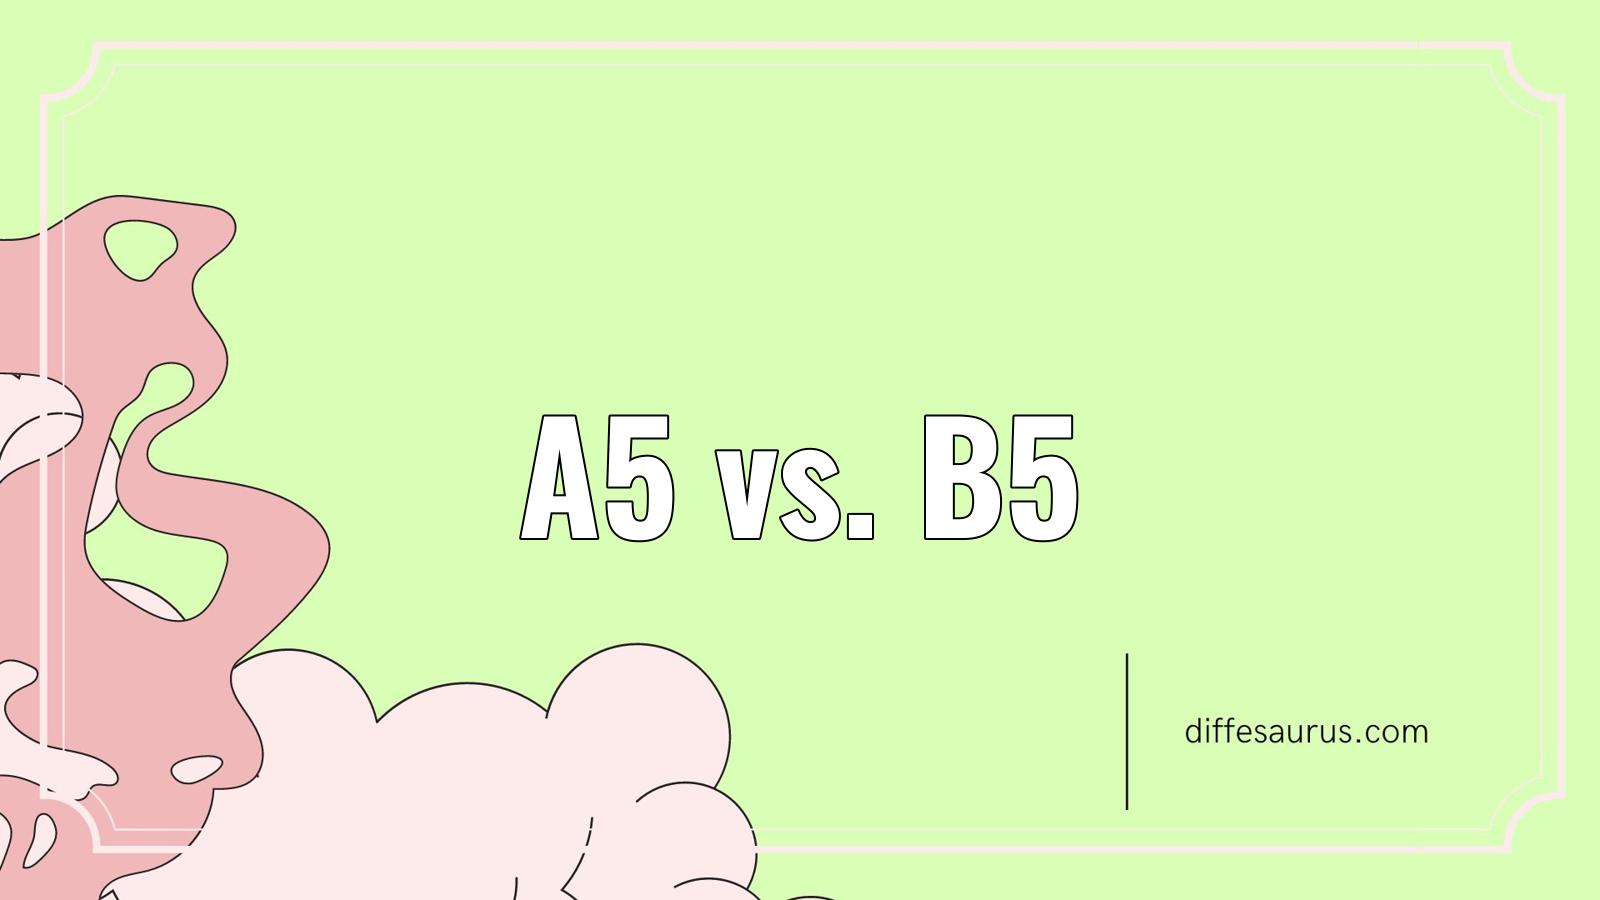 main-difference-between-a5-and-b5-diffesaurus